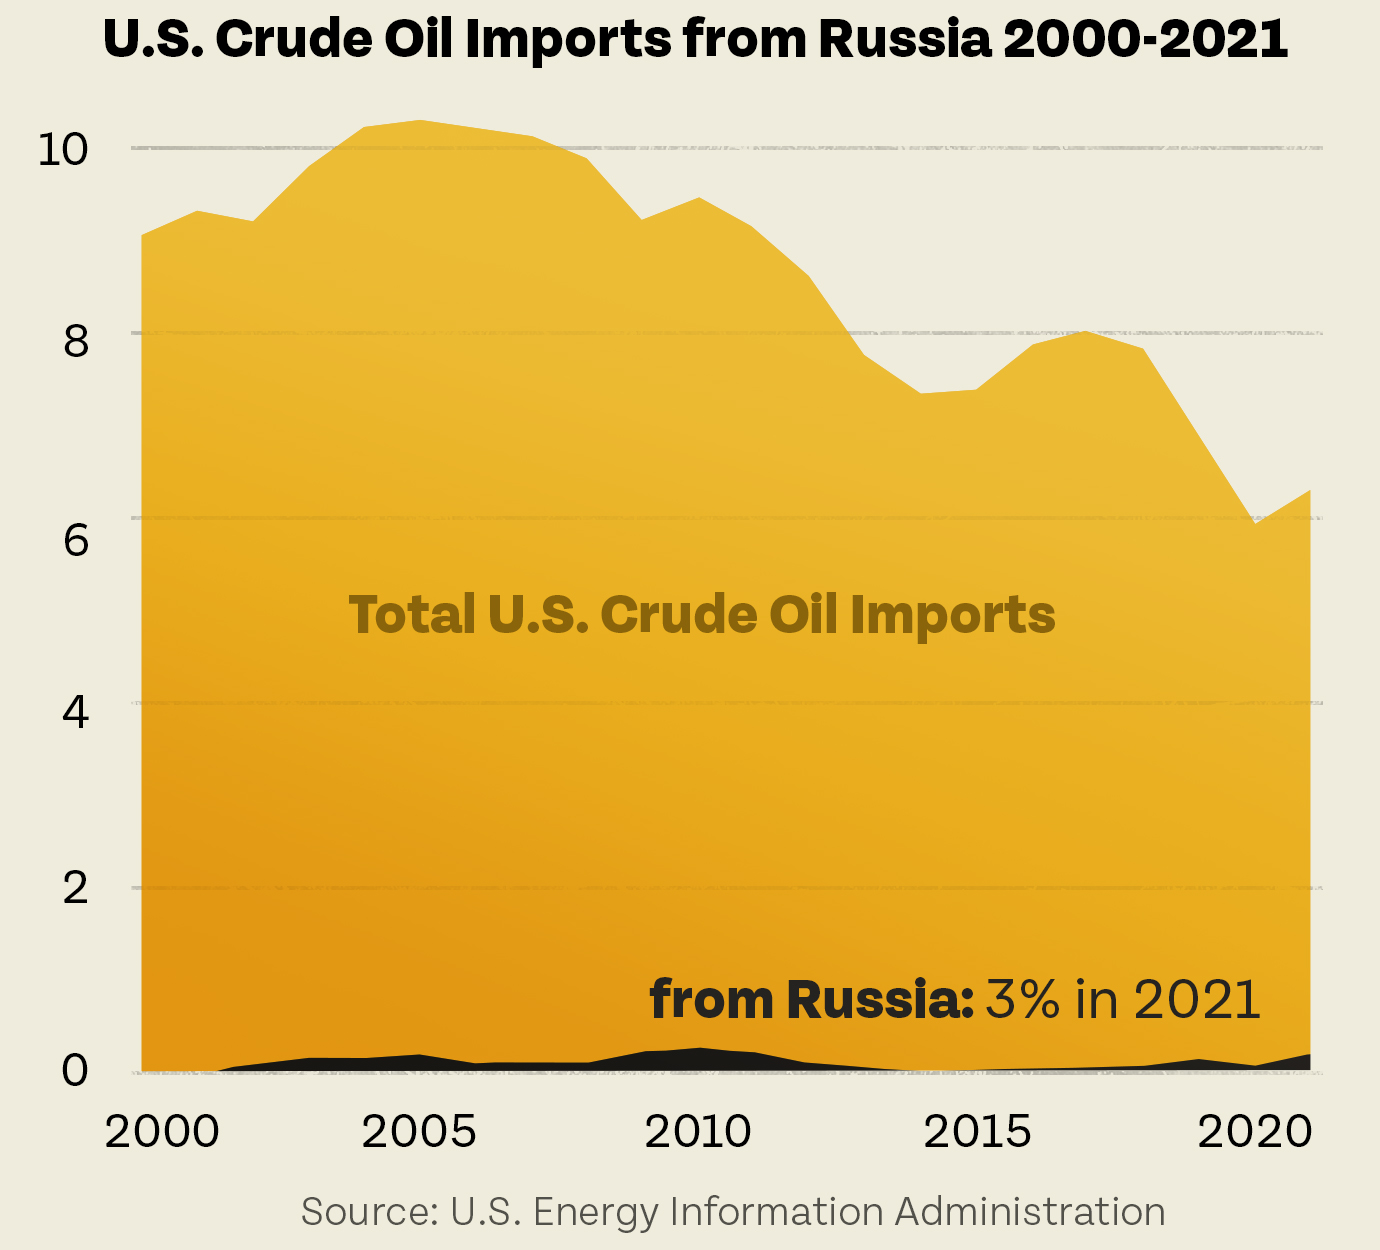 Crude Oil Imports from Russia 2000-2021